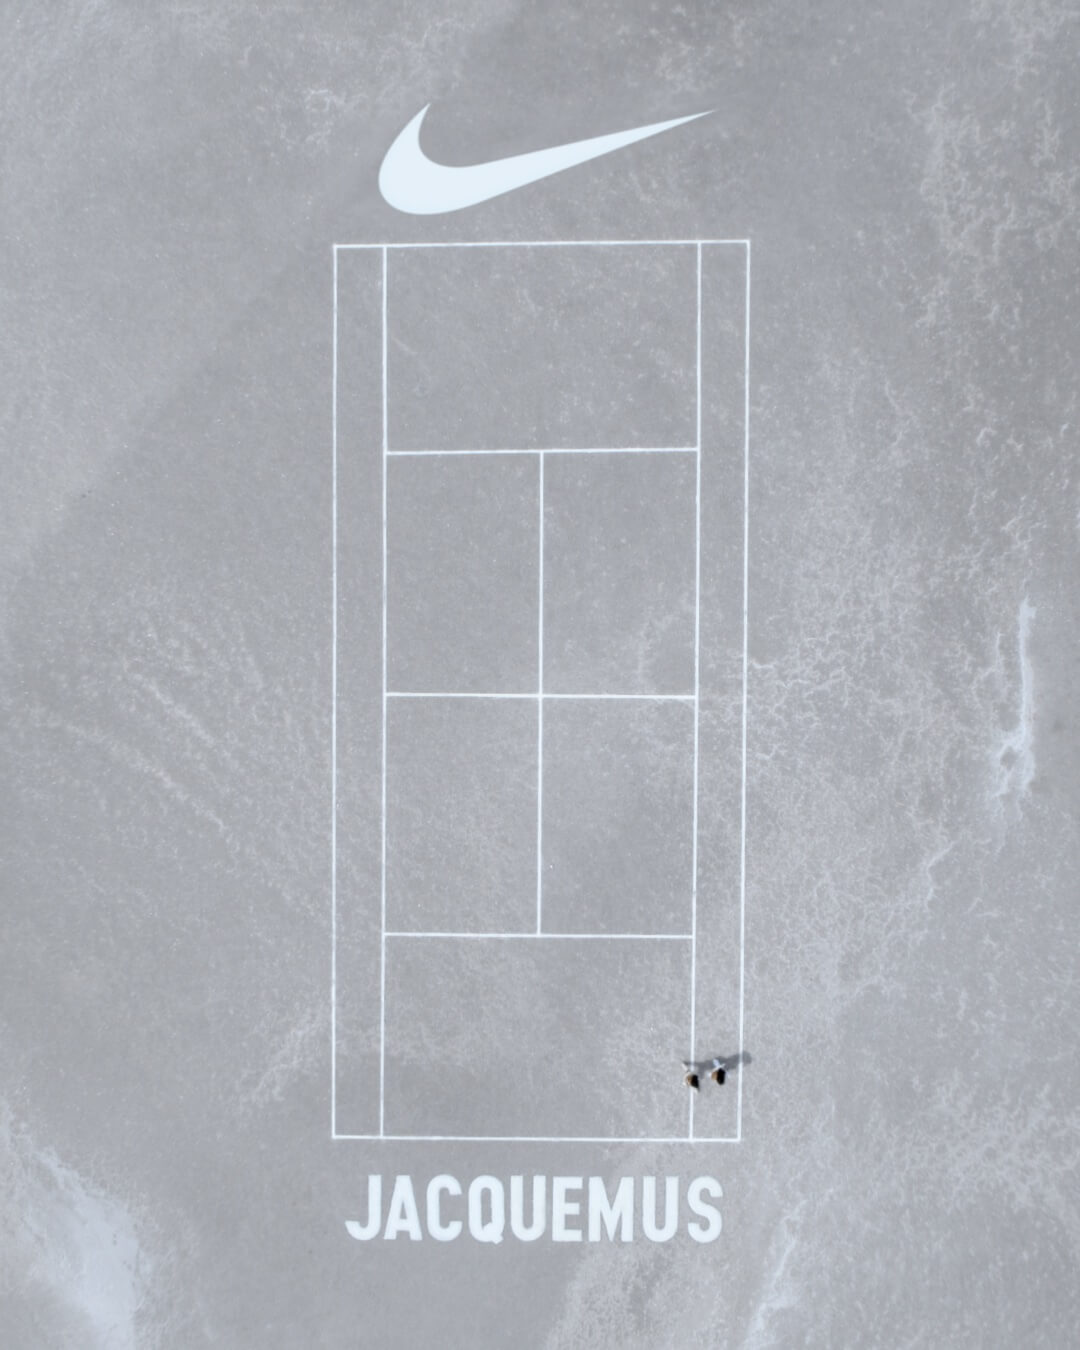 Nike x Jacquemus Deliver Minimalist Sportswear Collection